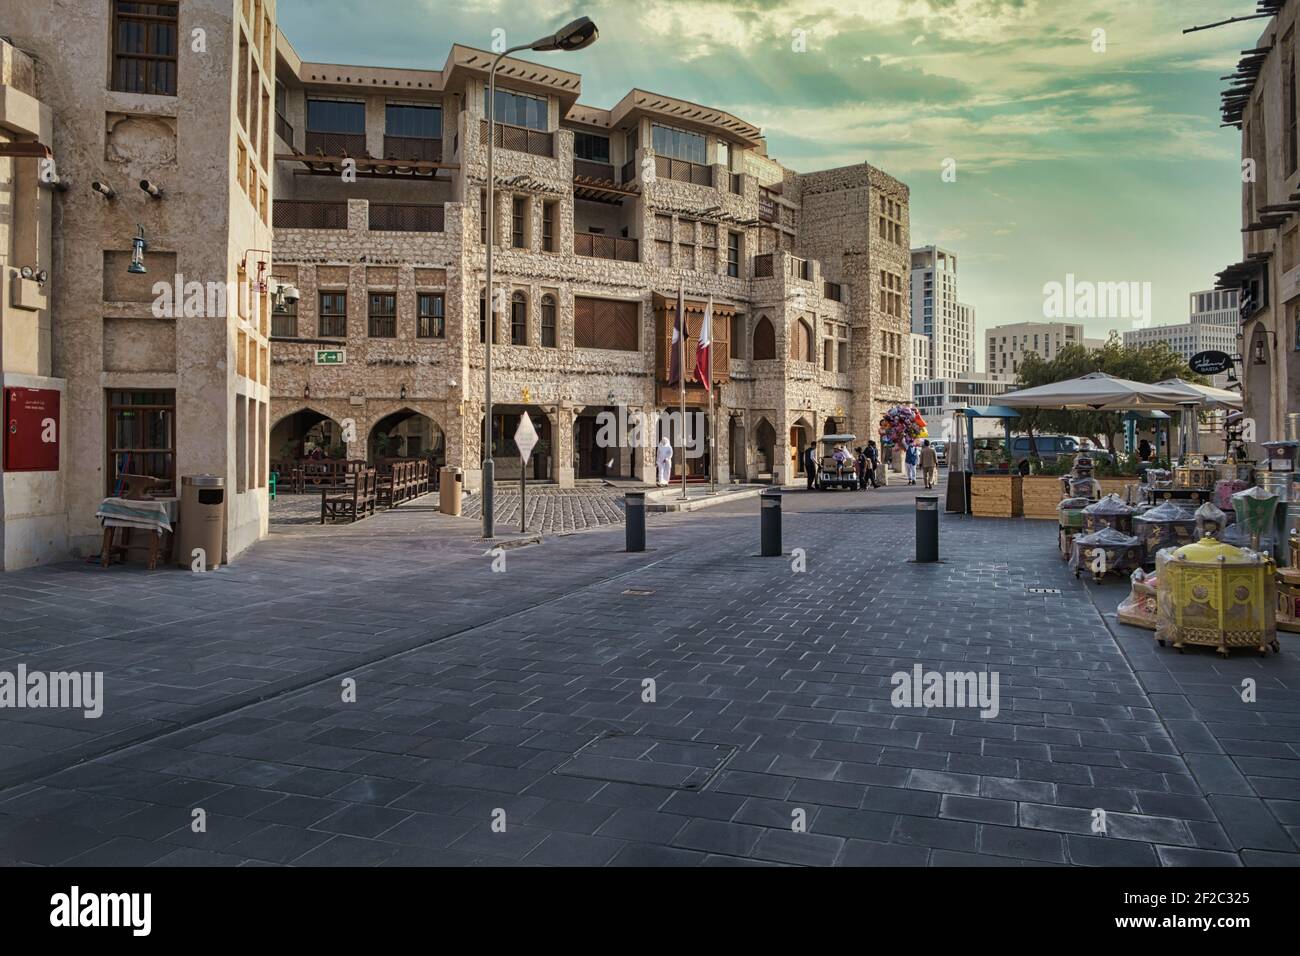 Souq waqif in Doha Qatar daylight view showing traditional Arabic architecture , Qatar flag and people in the street Stock Photo